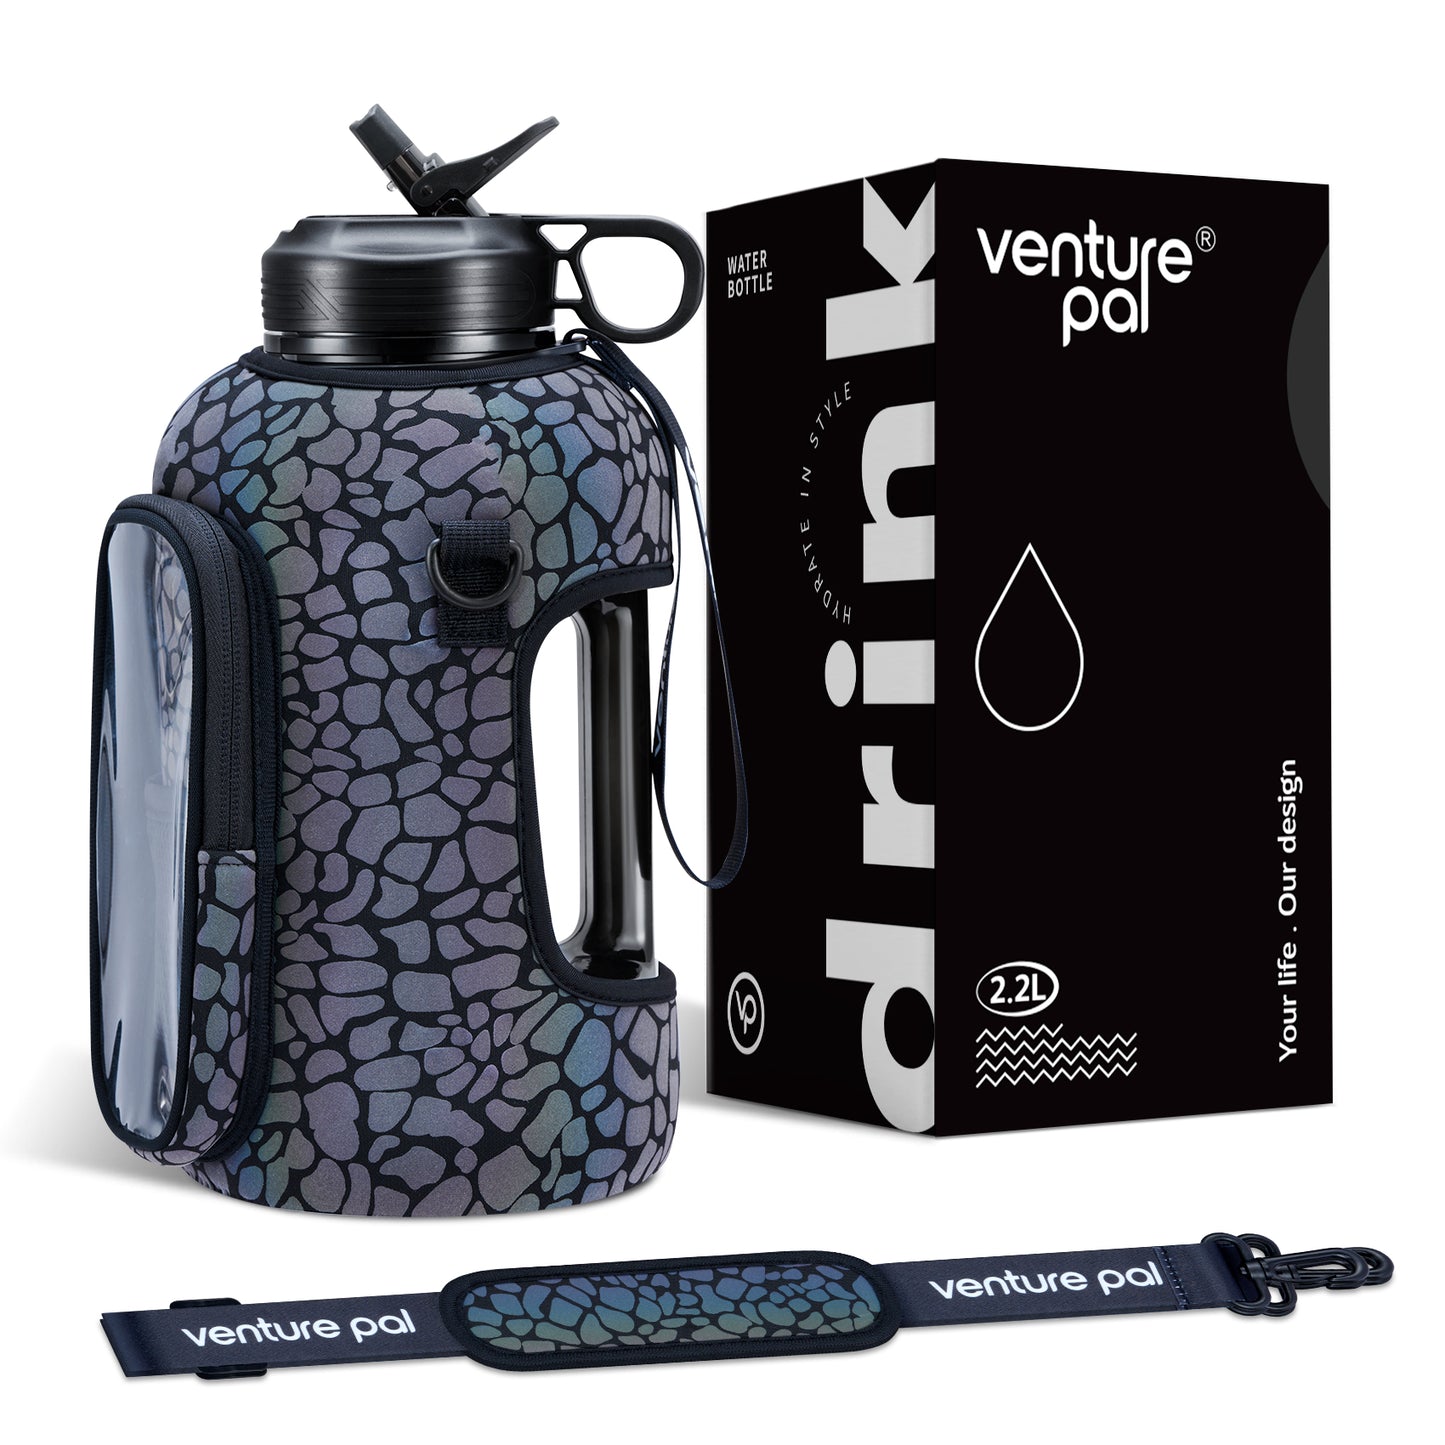 Venture Pal 64 oz Motivational Water Bottle with Storage Sleeve and Adjustable Strap - Comes with a Complimentary Cleaning Brush and Straw Brush